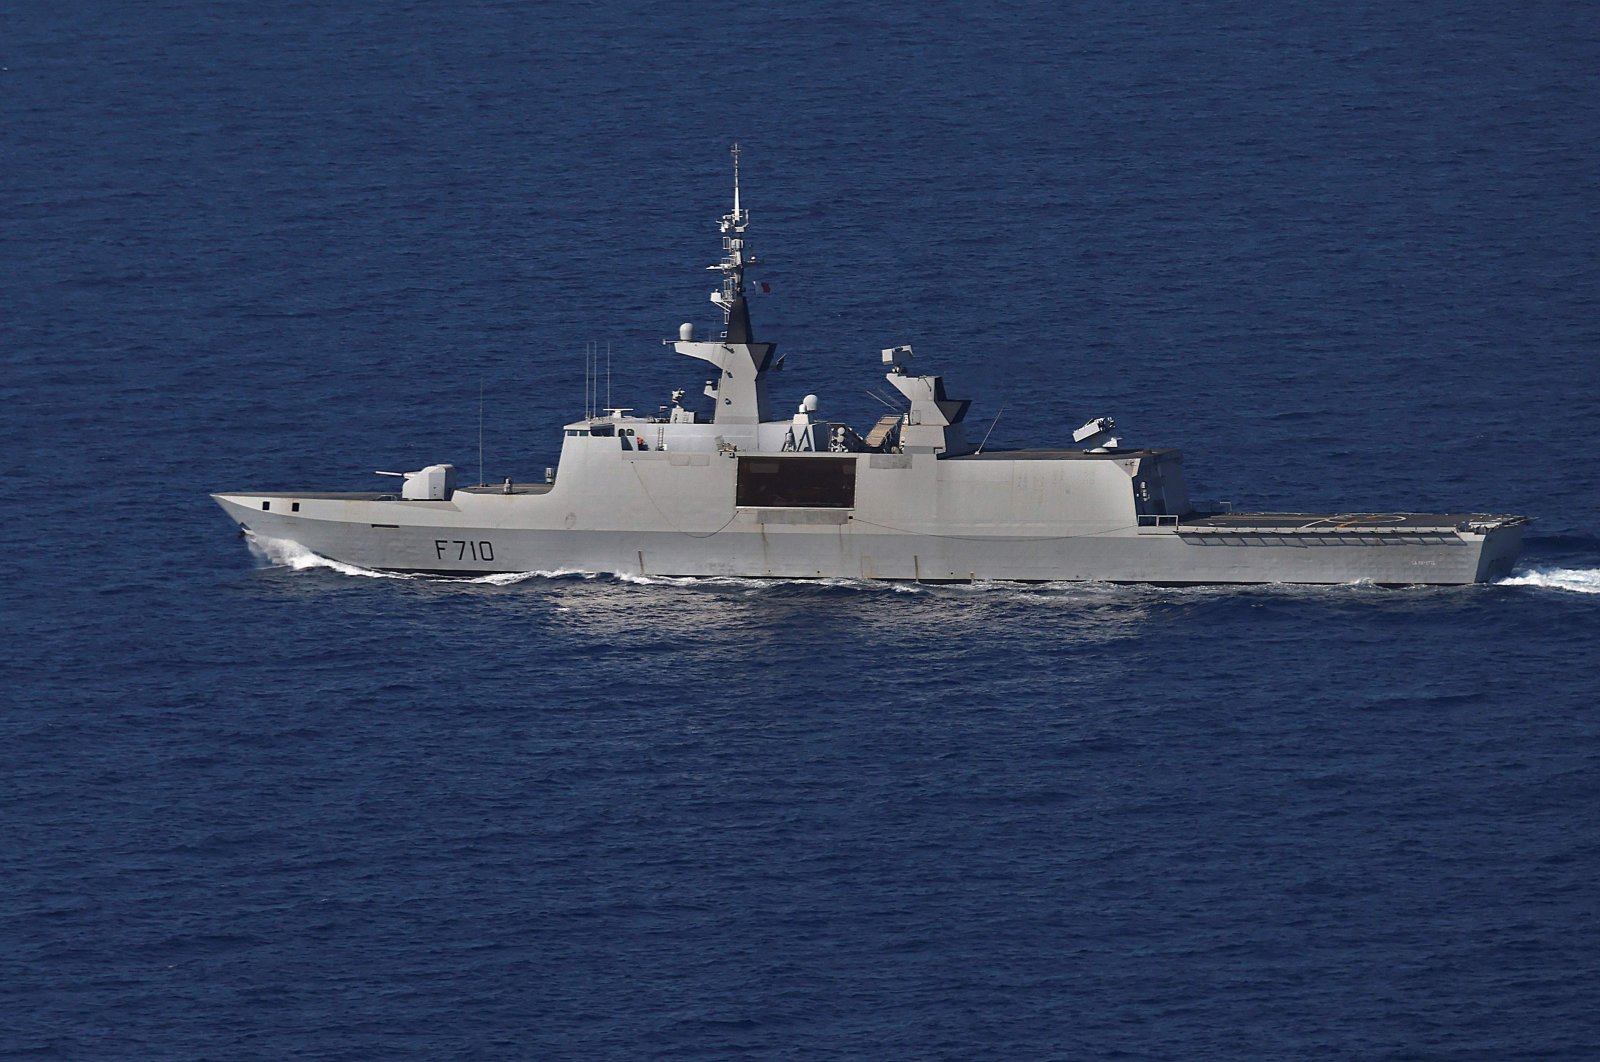 The French stealth frigate La Fayette sails off Syria, Lebanon, Cyprus and Turkey, on Oct. 27, 2020. (AFP Photo)